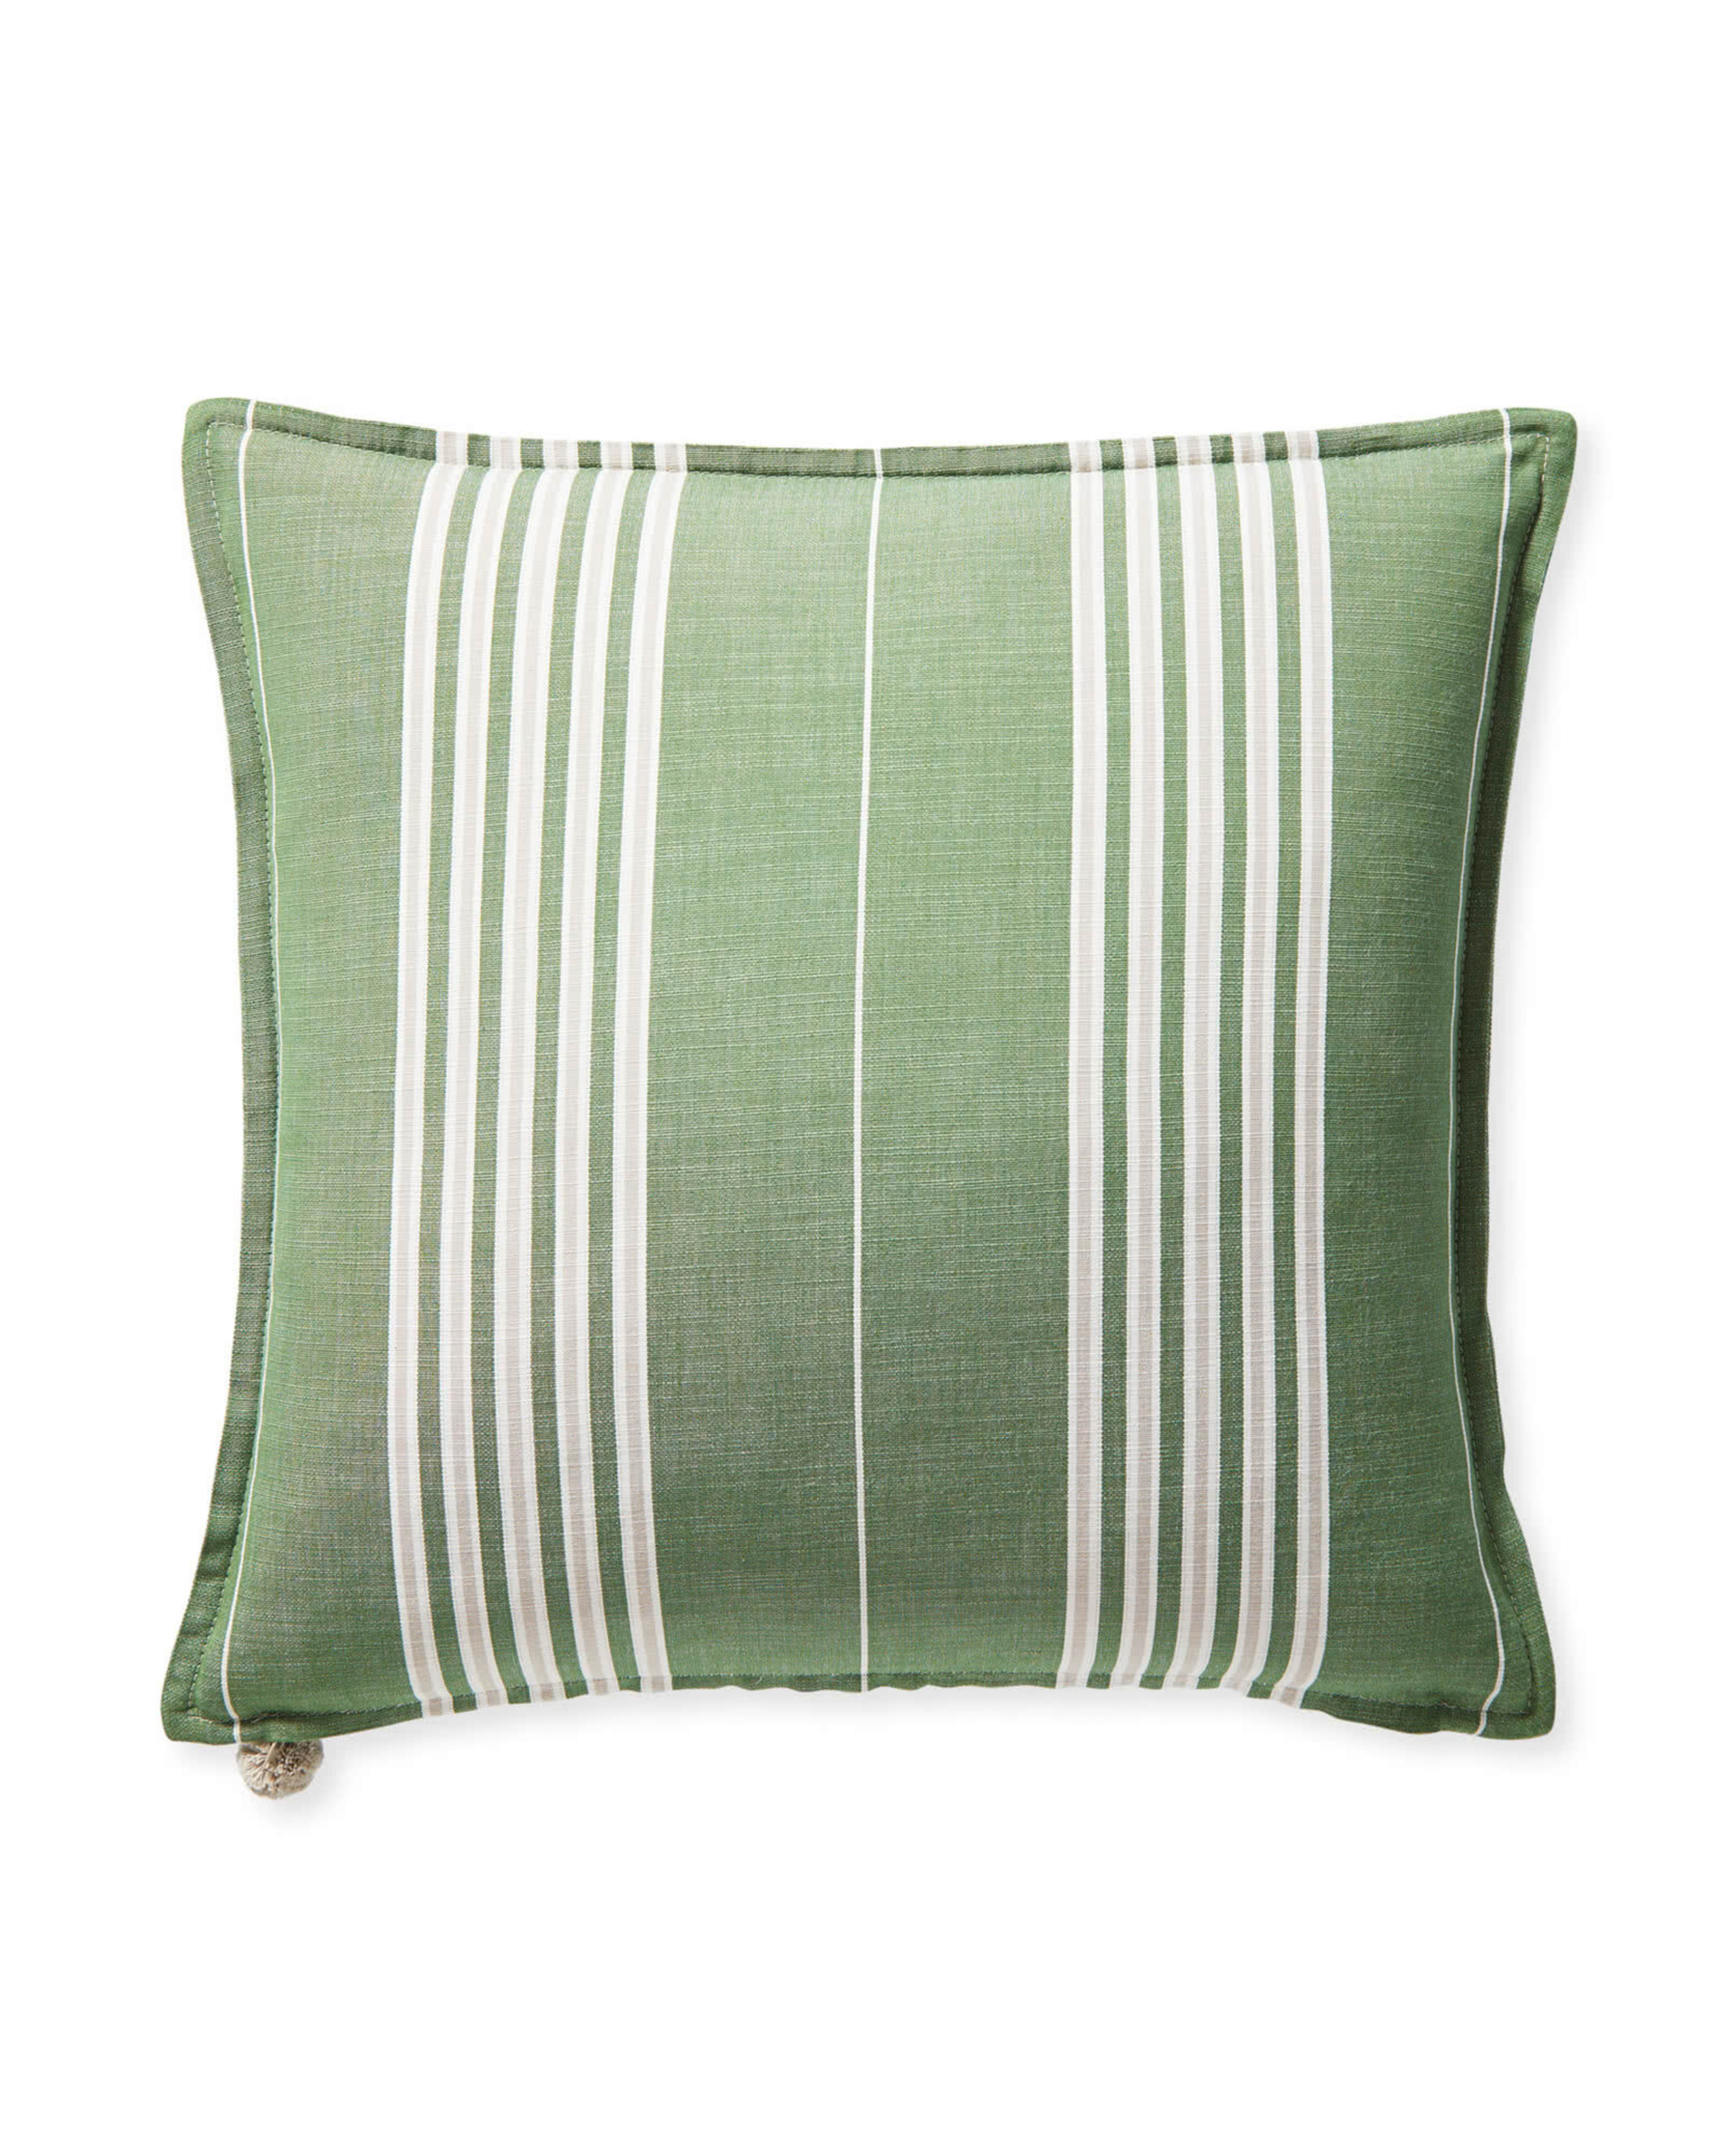 Perennials® Lake Stripe Pillow Cover - Serena and Lily